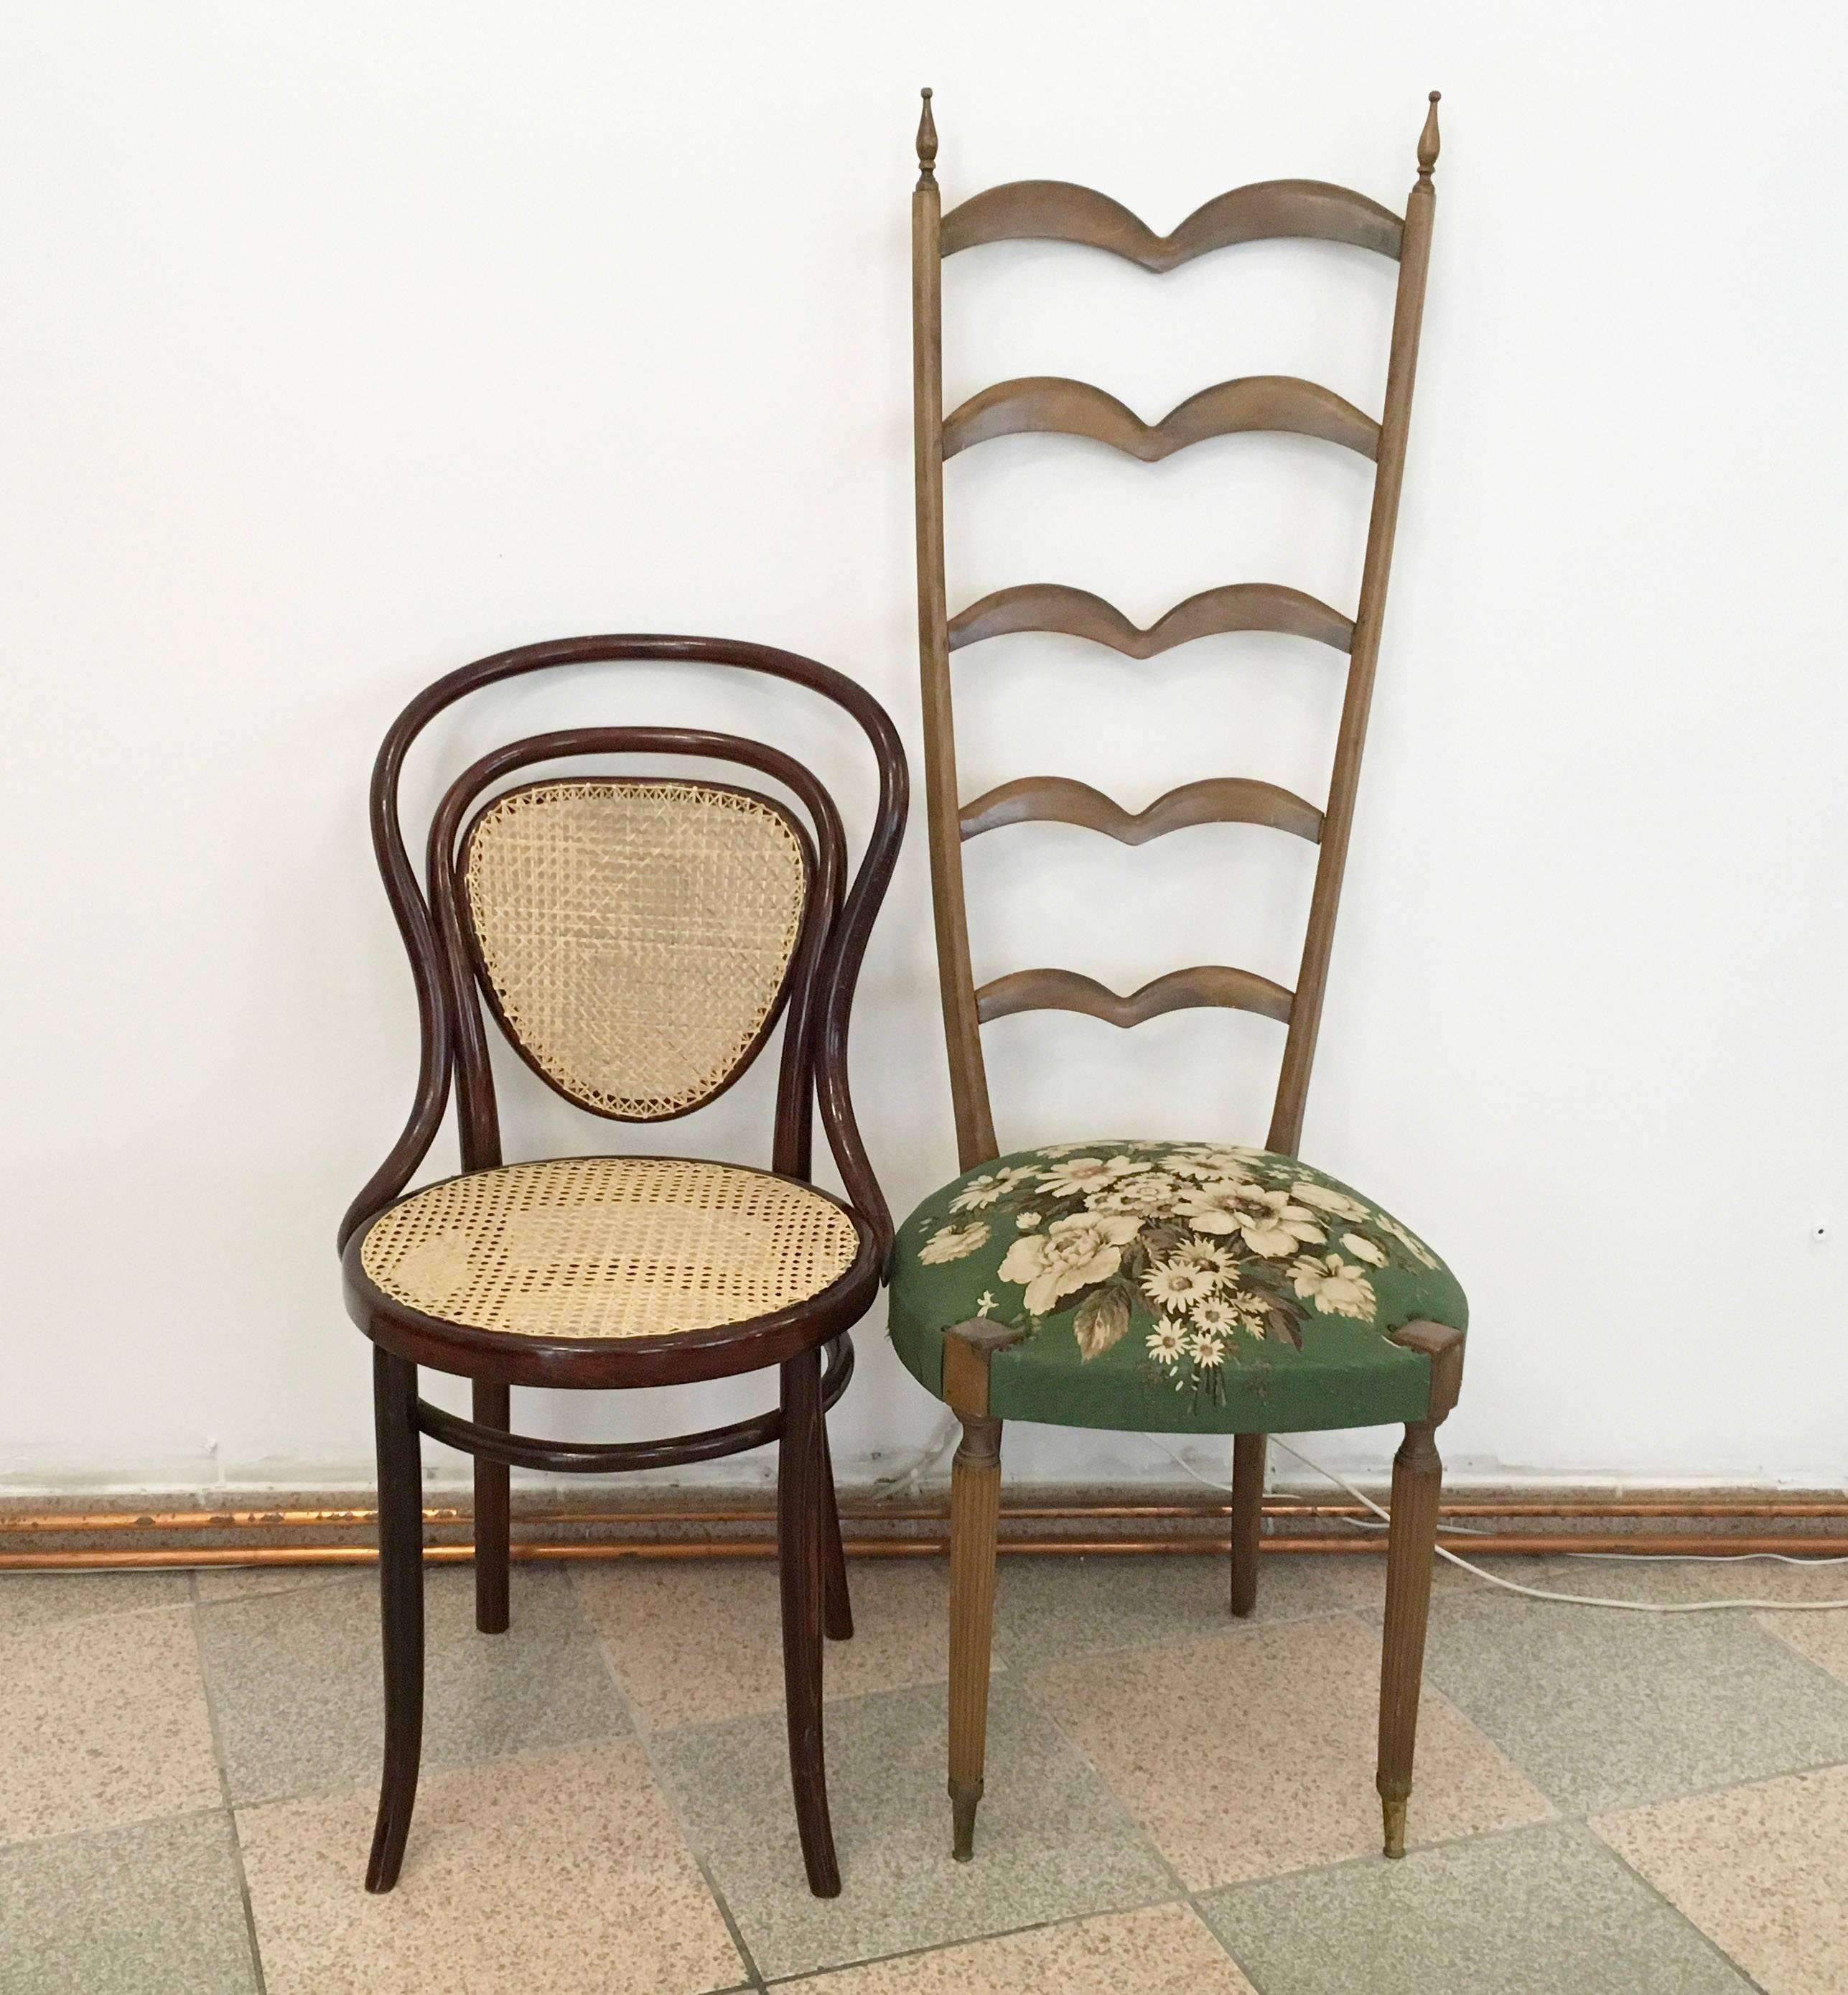 Pair of High-Backed Chairs Attributed to Oskar Strnad or Hugo Gorge For Sale 2